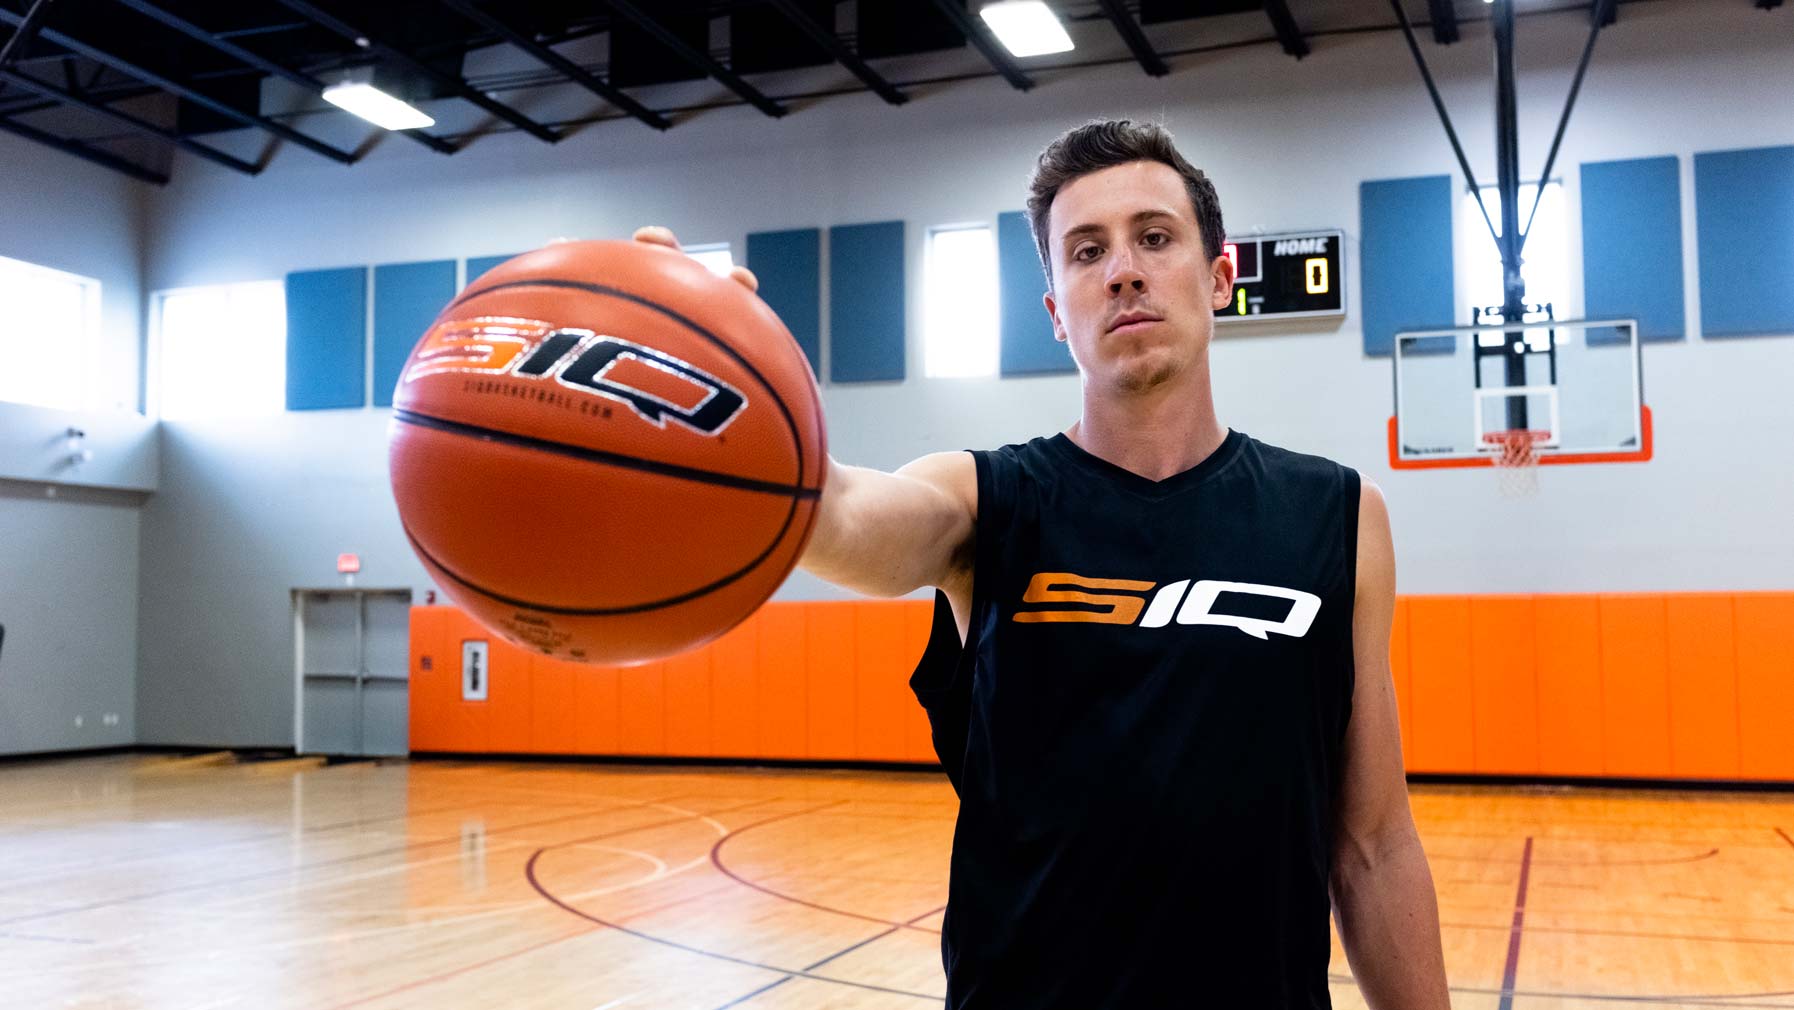 Duncan Robinson, professional basketball player on the NBA's Miami Heat, using the indoor men's smart basketball.